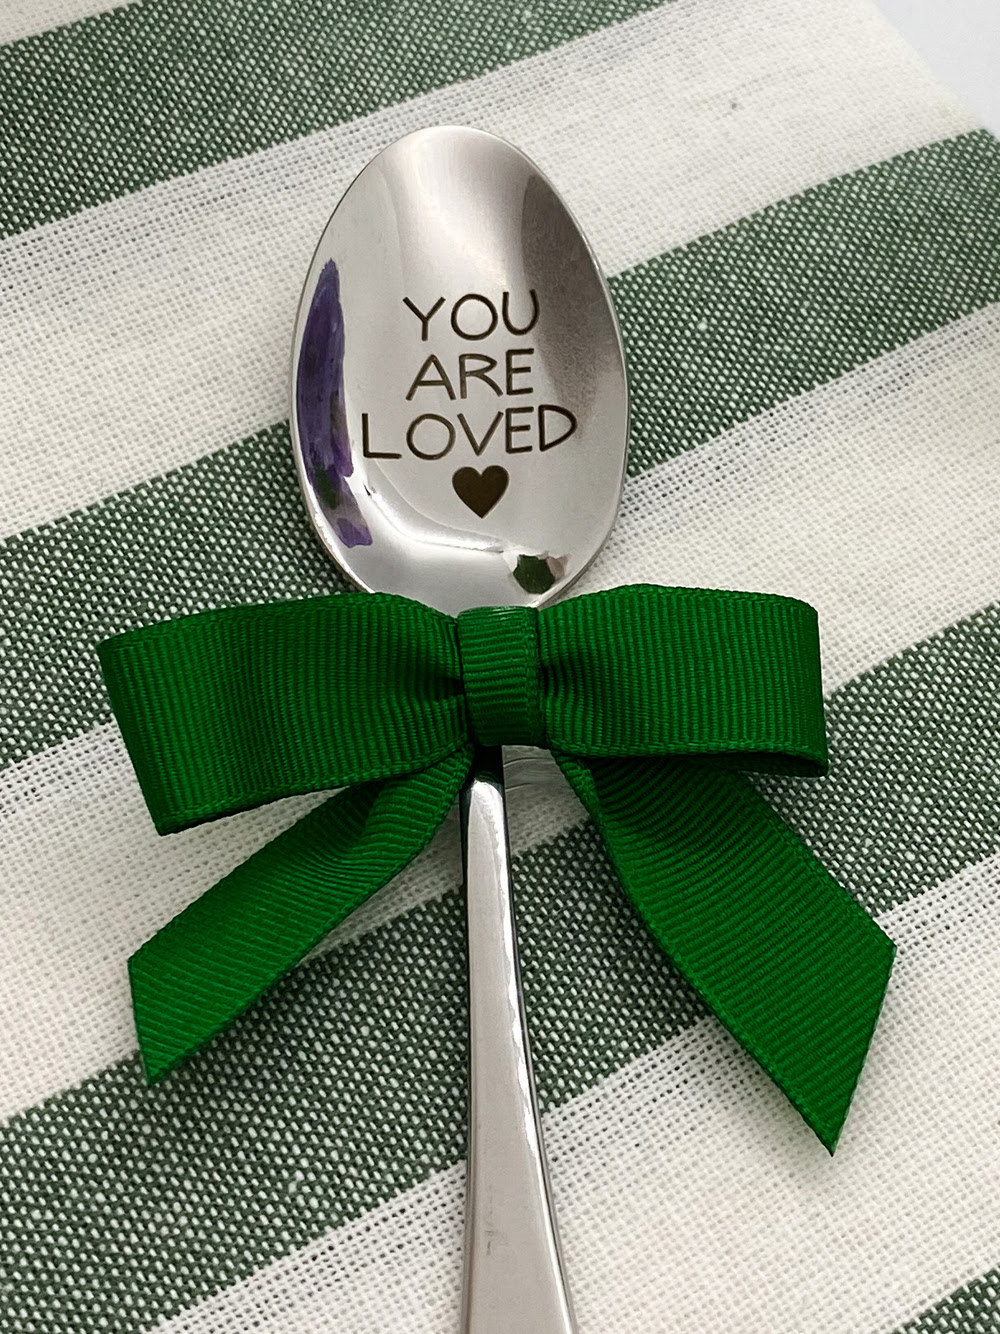 Our Engraved Spoons are Now Available